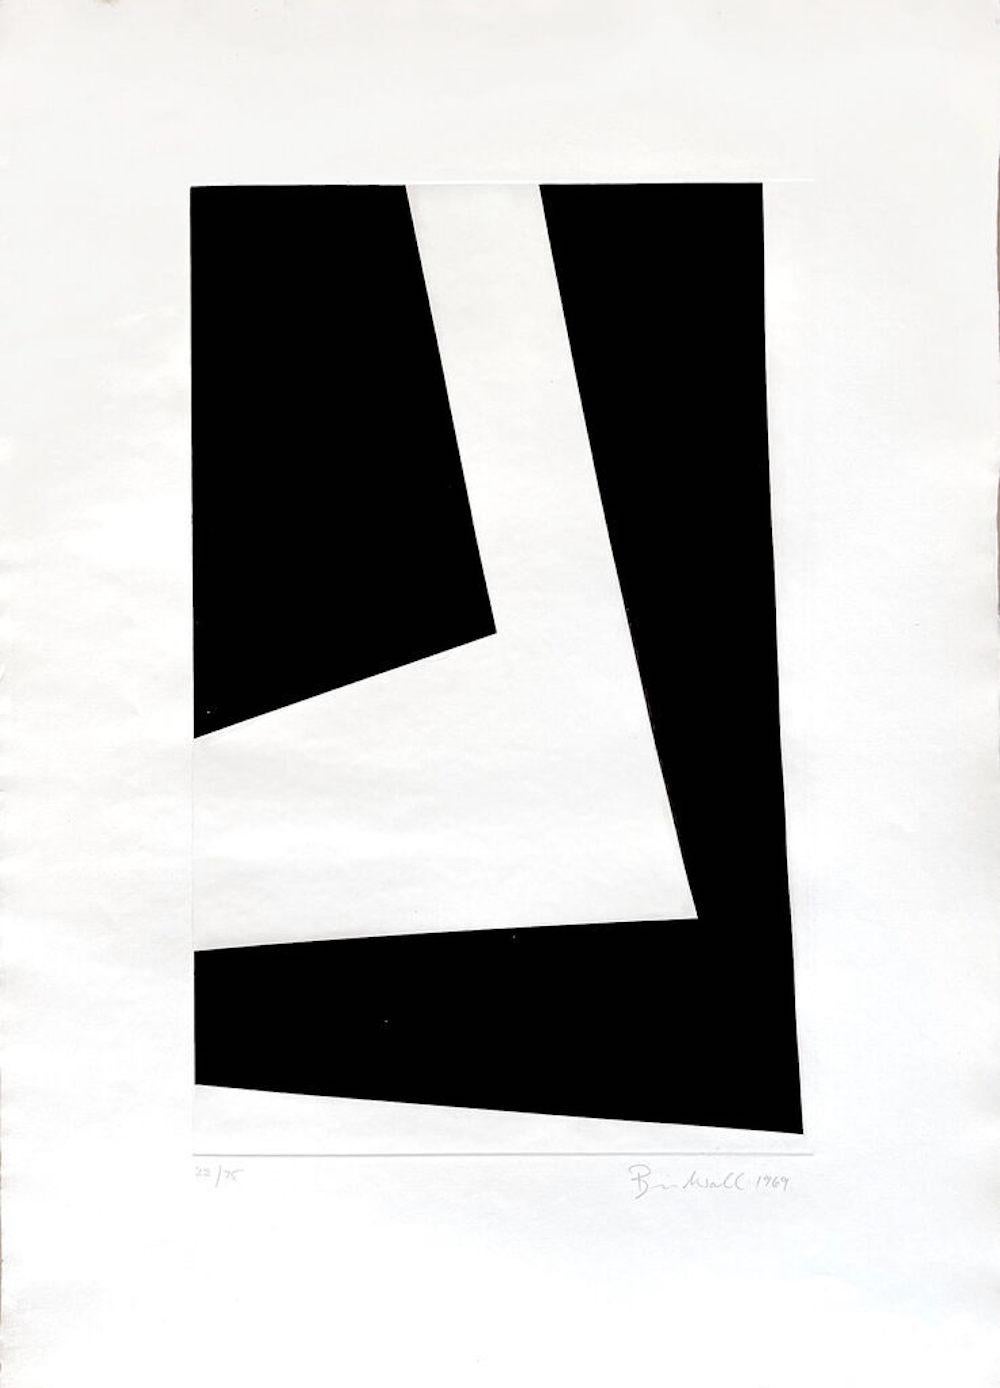 Untitled Hard Edge Minimalist Etching (Geometric Abstraction) from the 1960s - Print by Brian Wall